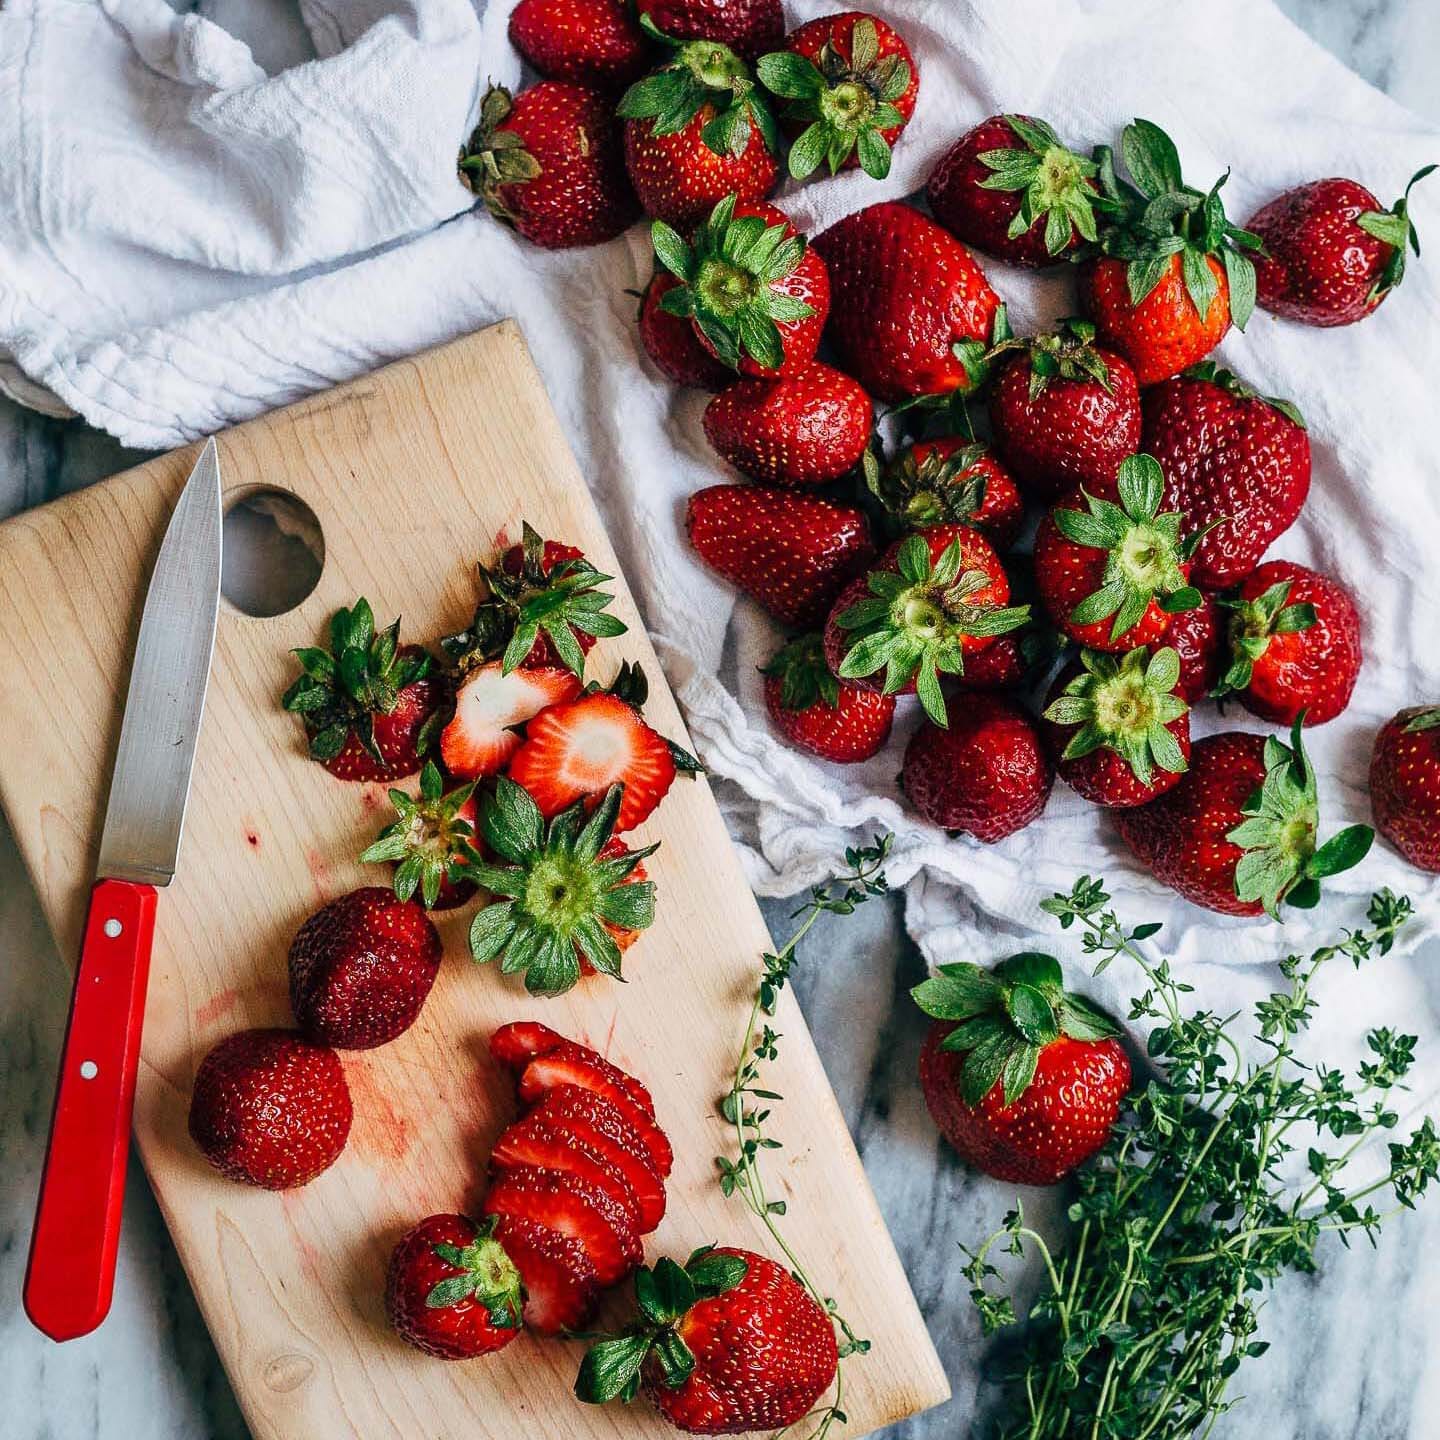 Sliced strawberries on a cutting board and little strawberries alongside 